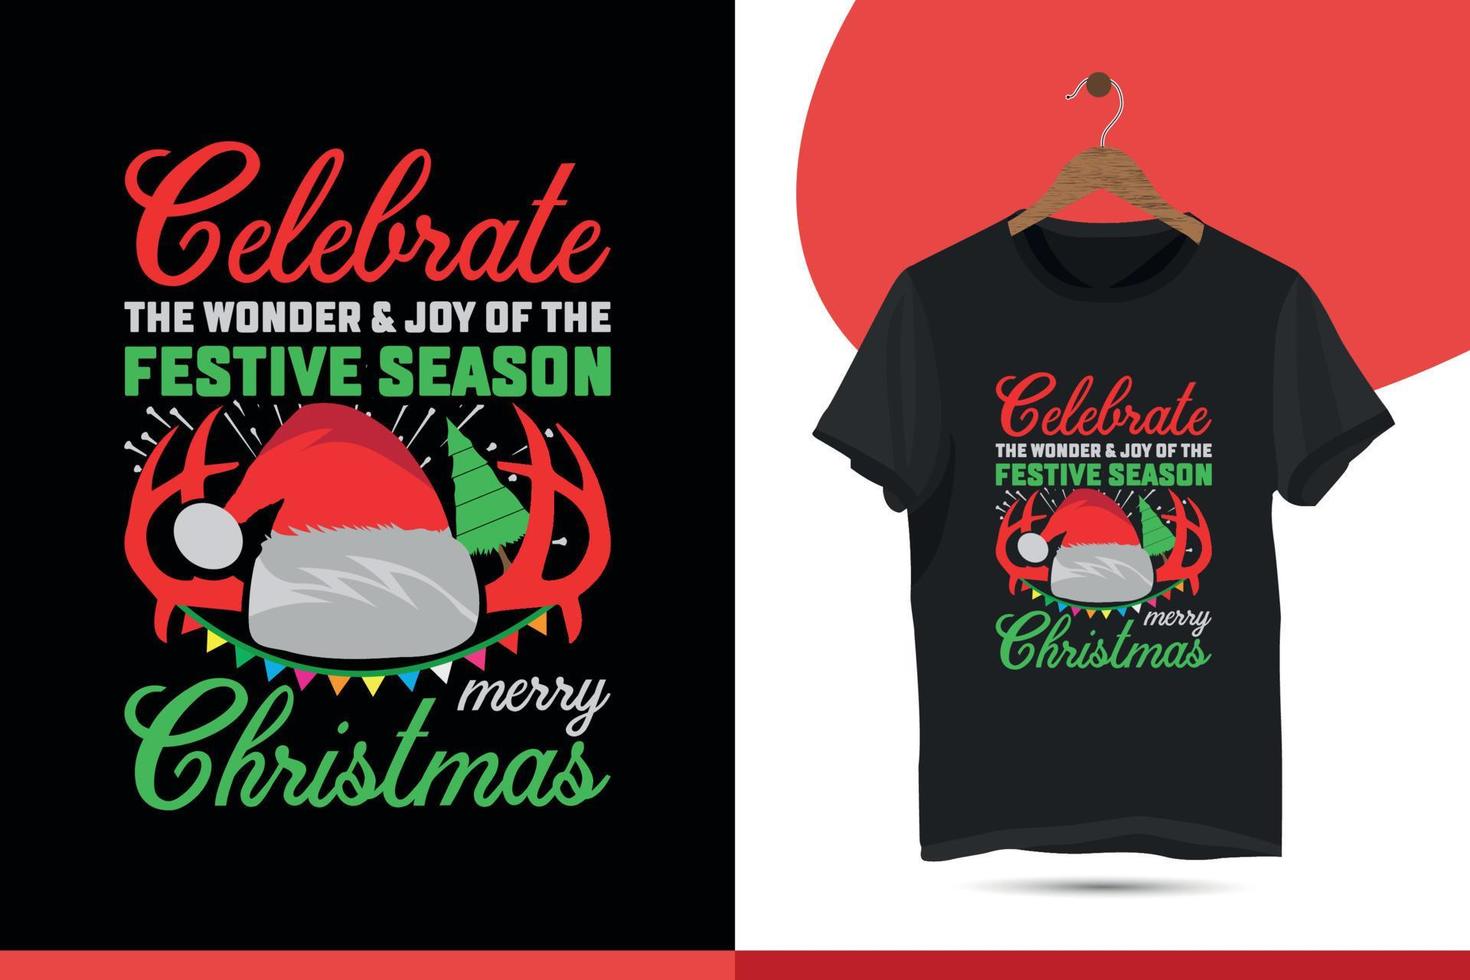 Celebrate Christmas Festival Season Typography T-shirt Design Vector Template with Santa, Deer, Pine Tree. Merry Christmas Holiday Gift fun illustration. Stock vector background